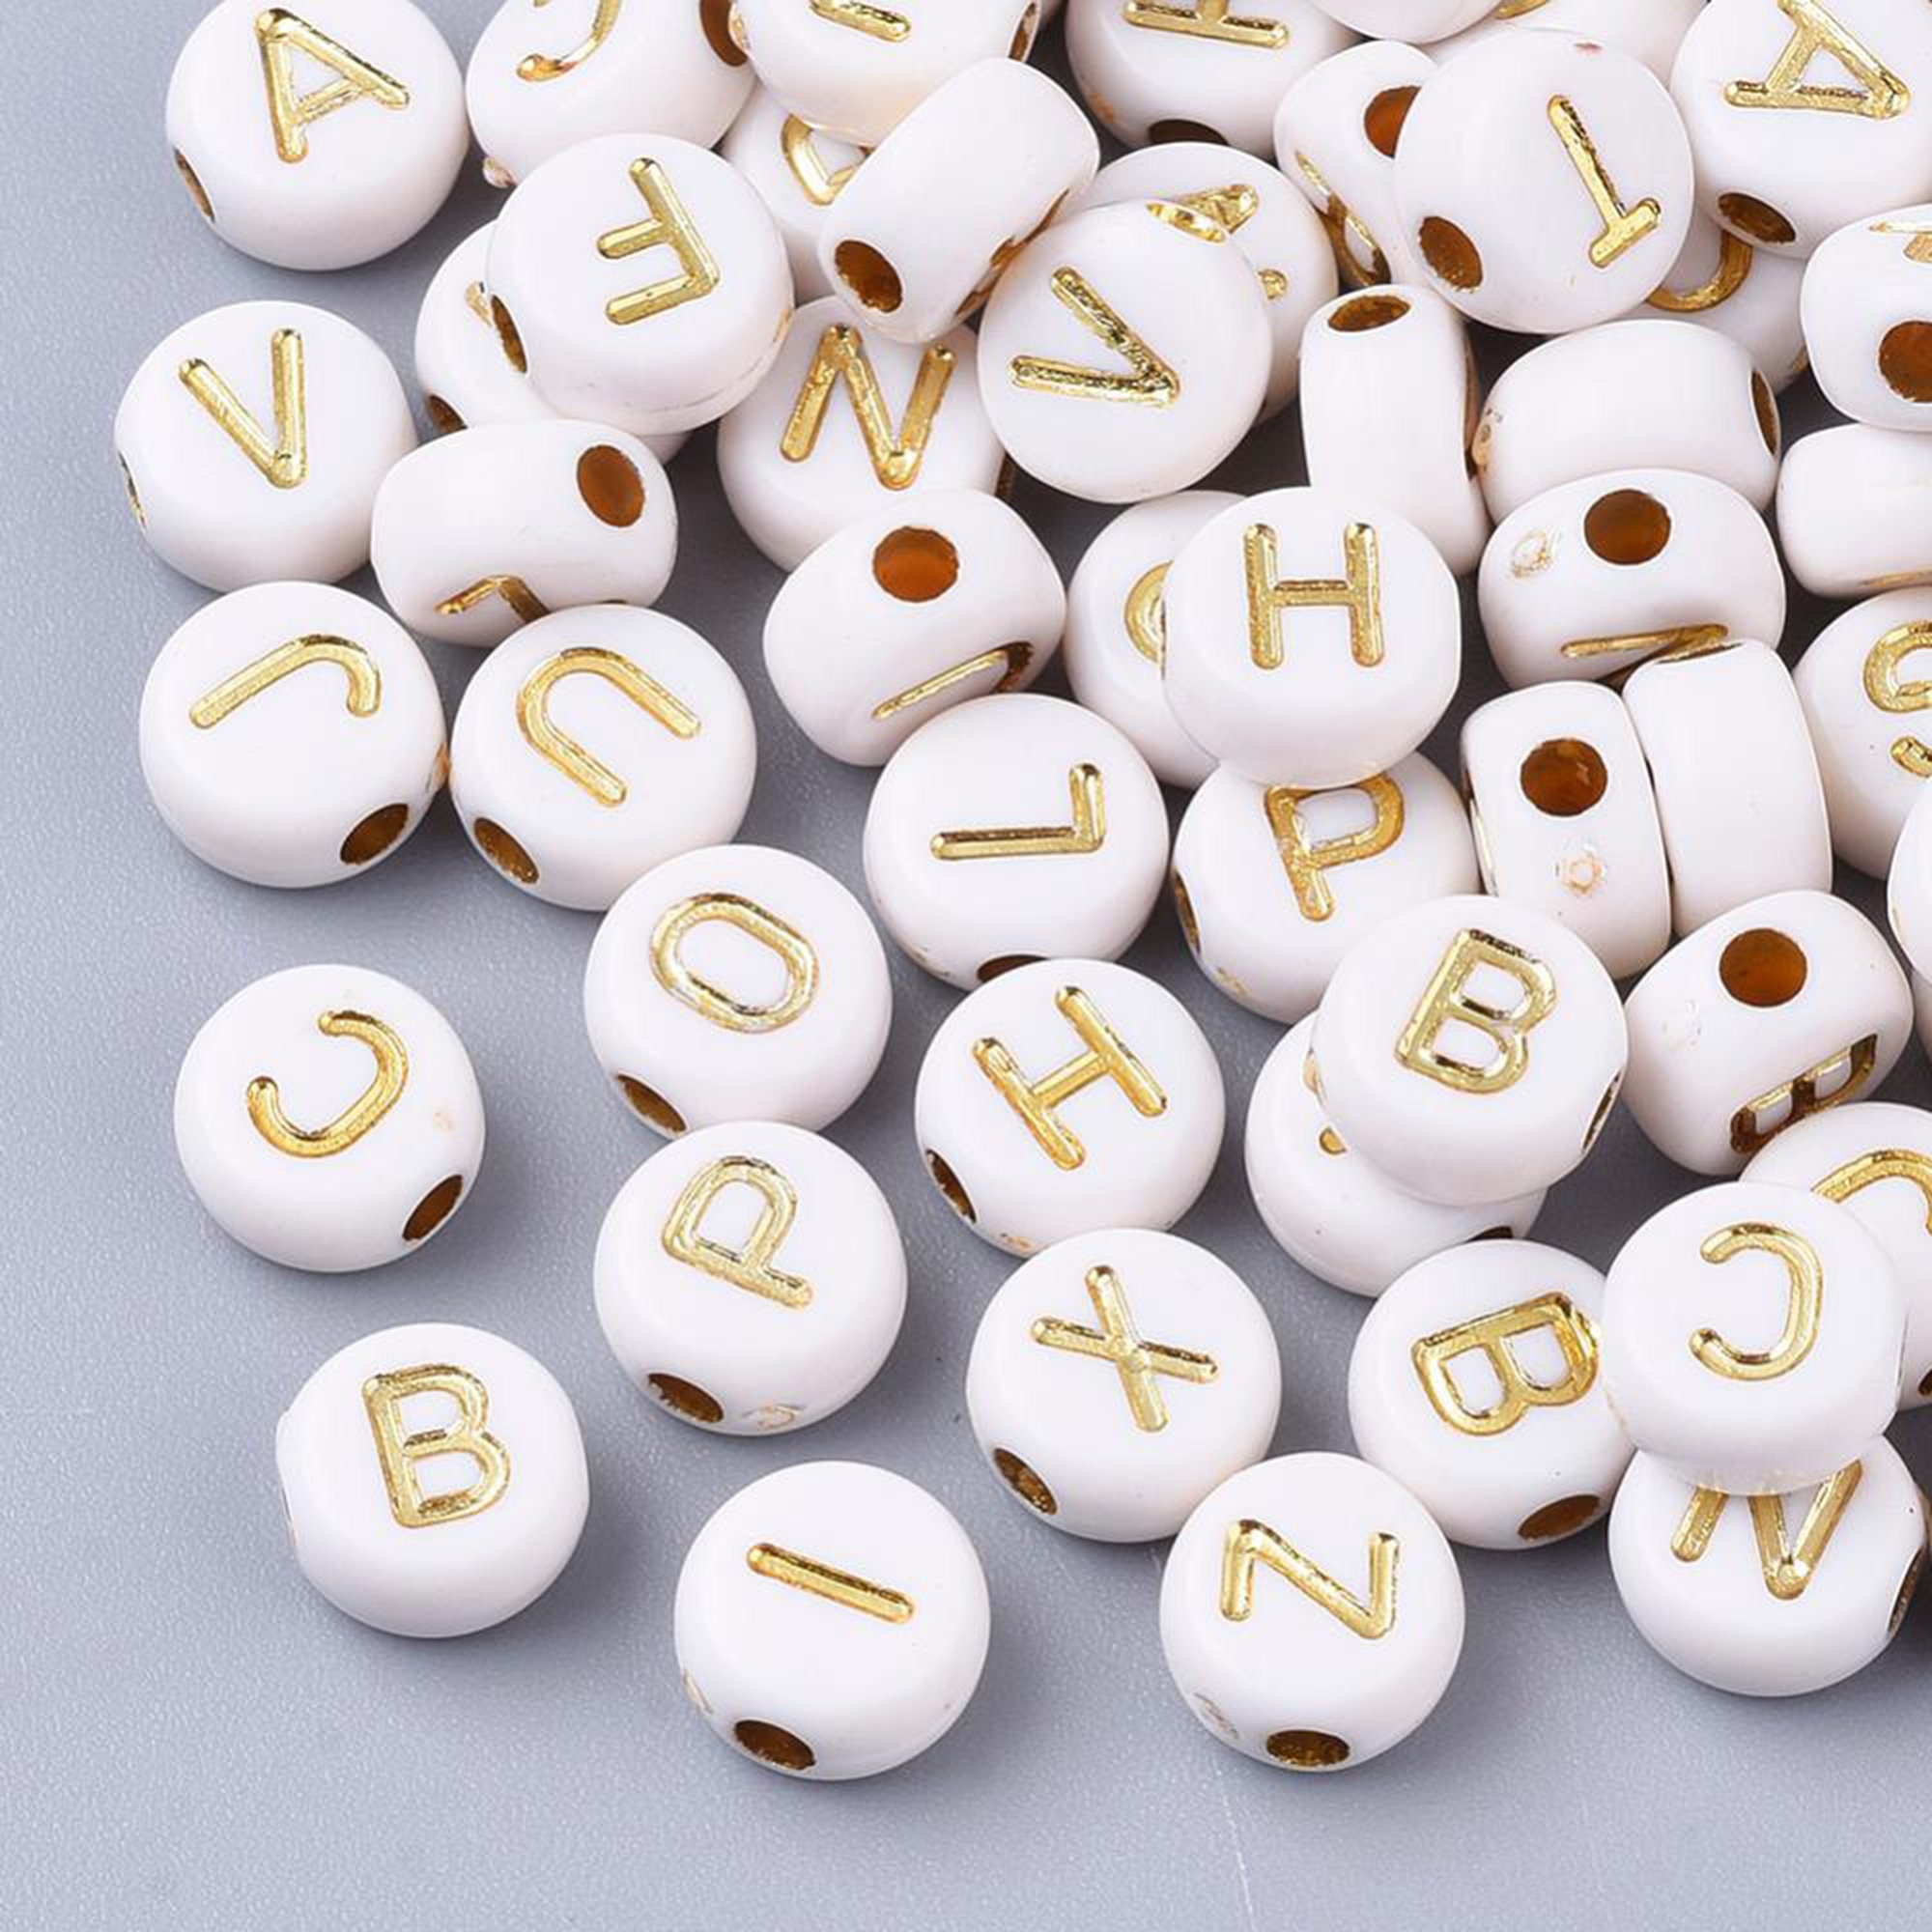 100pcs 6mm Acrylic Spacer Beads Letter Beads Square Alphabet Beads for  Jewelry Making DIY ABC Beads Alphabet Beads Letter Cube Beads Small 